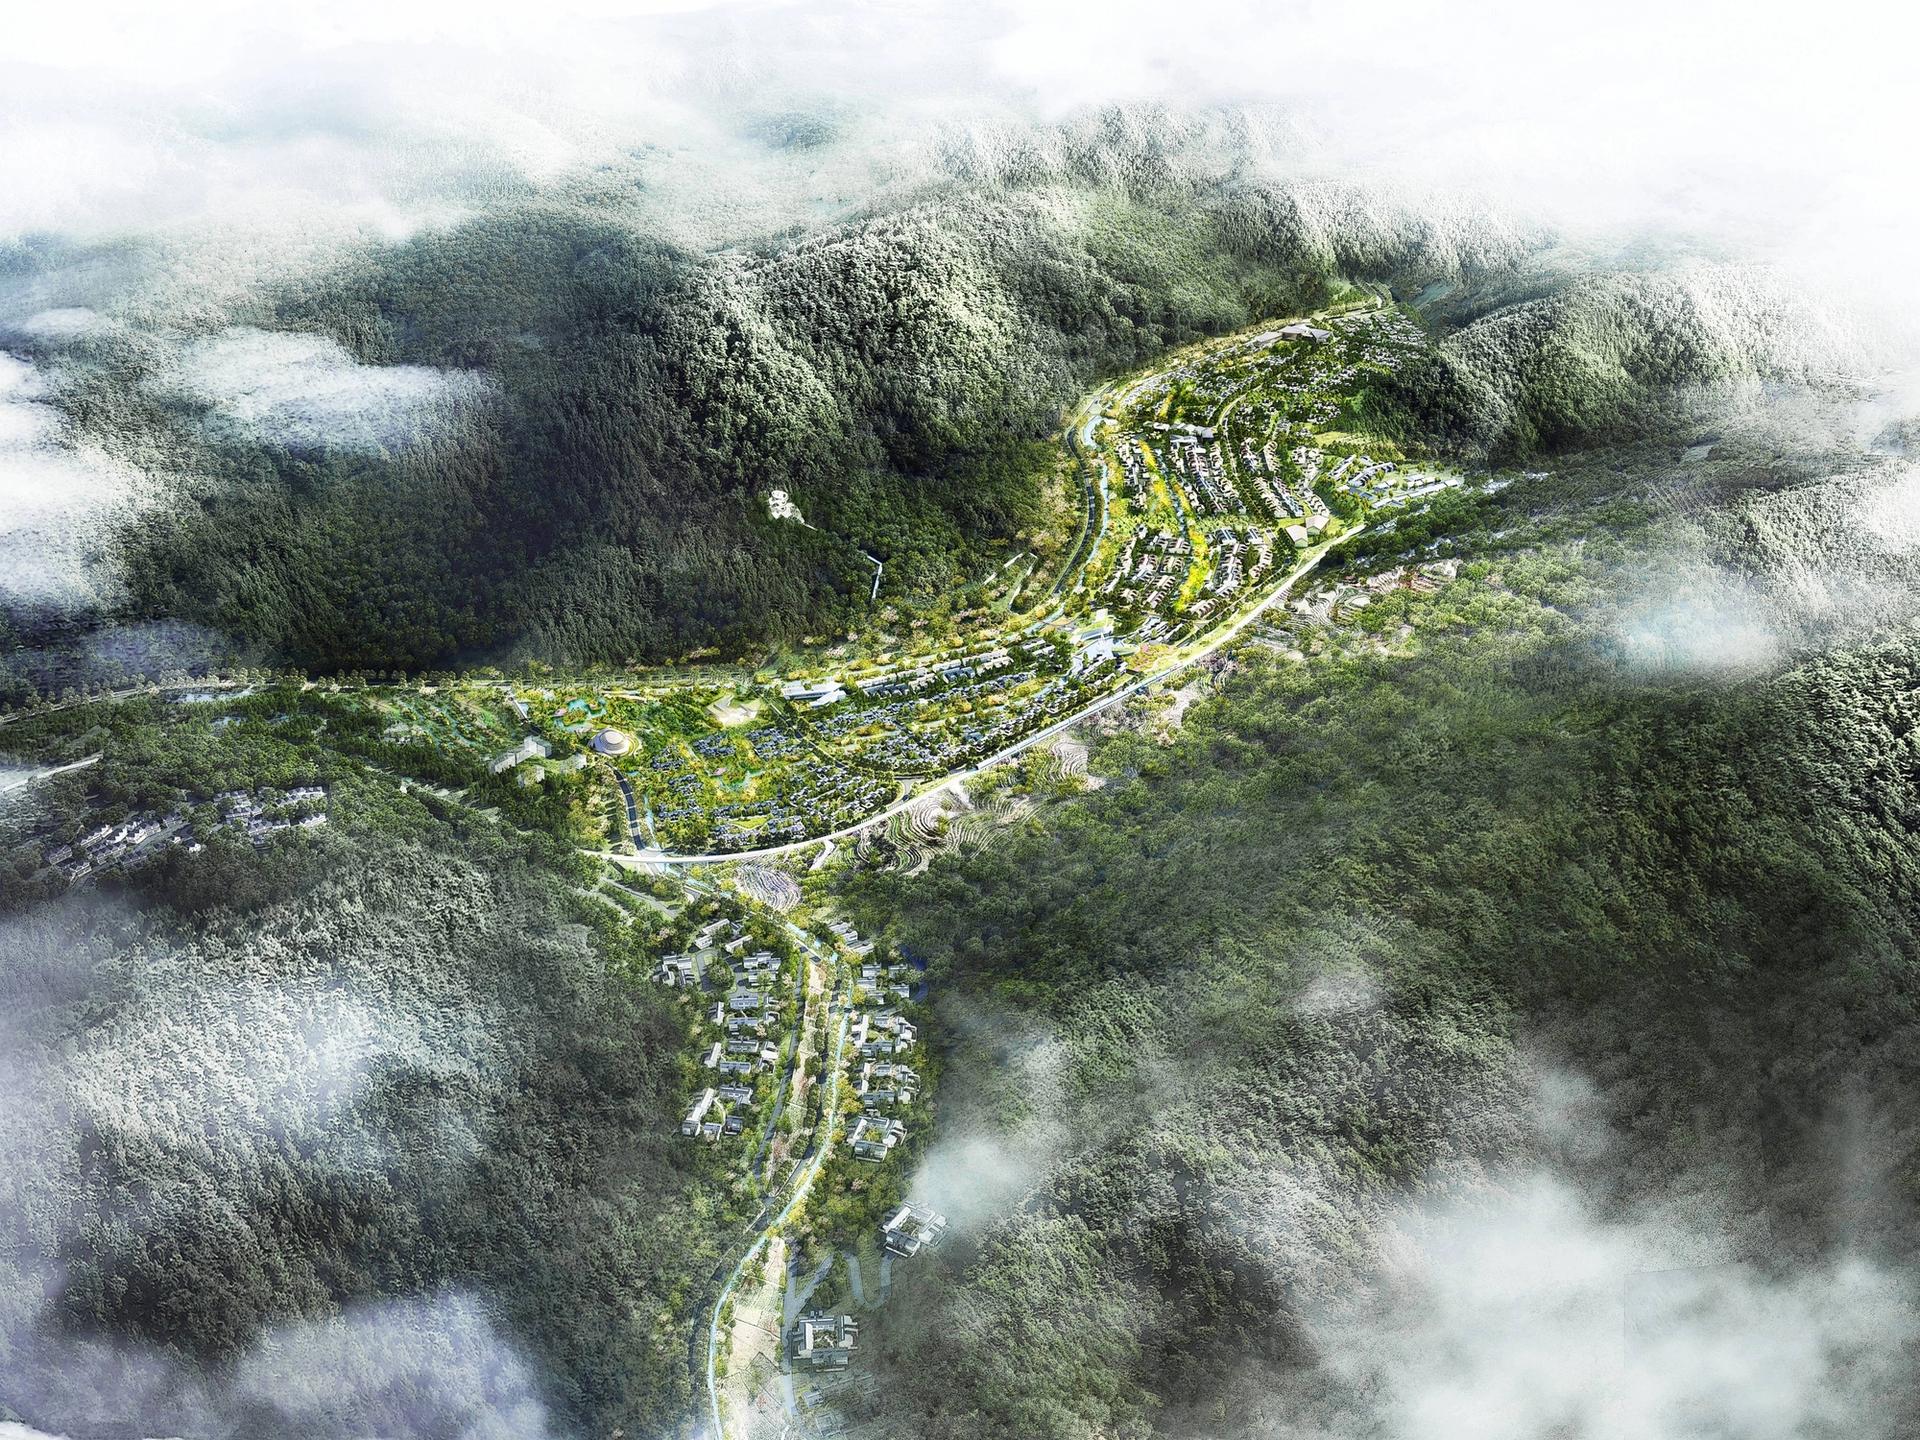 A rendering of the Valley XL development in Xinglong courtesy of Valley XL